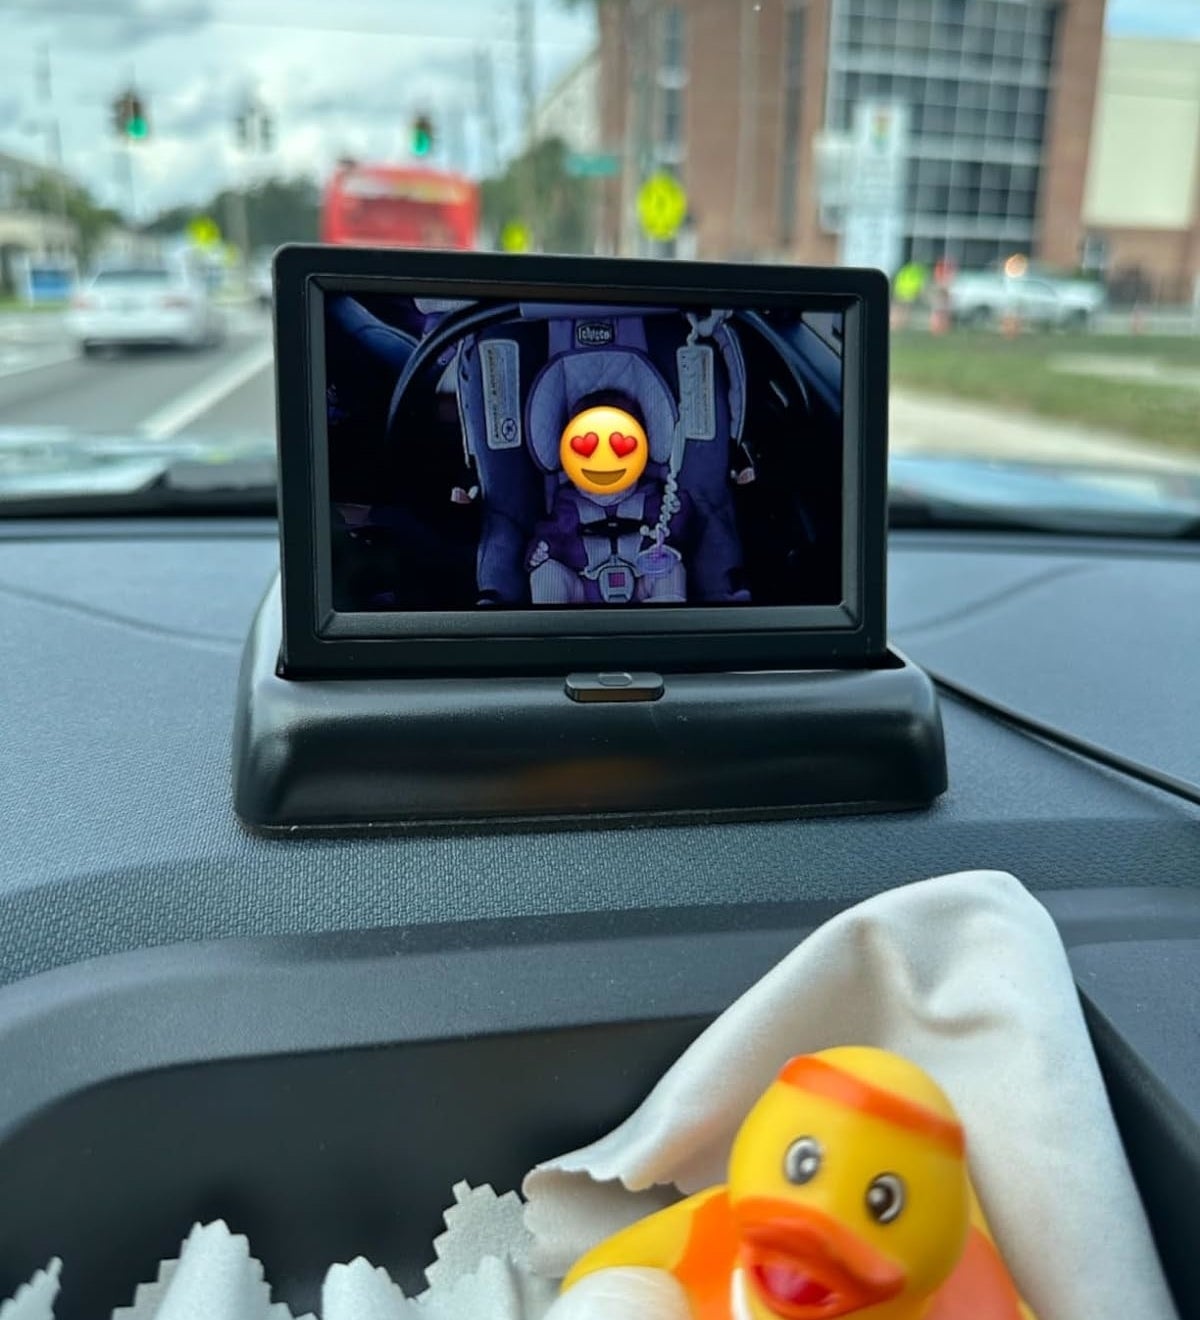 Photo of a car&#x27;s dashboard with a digital device displaying a cartoon character, while a rubber duck sits in the foreground